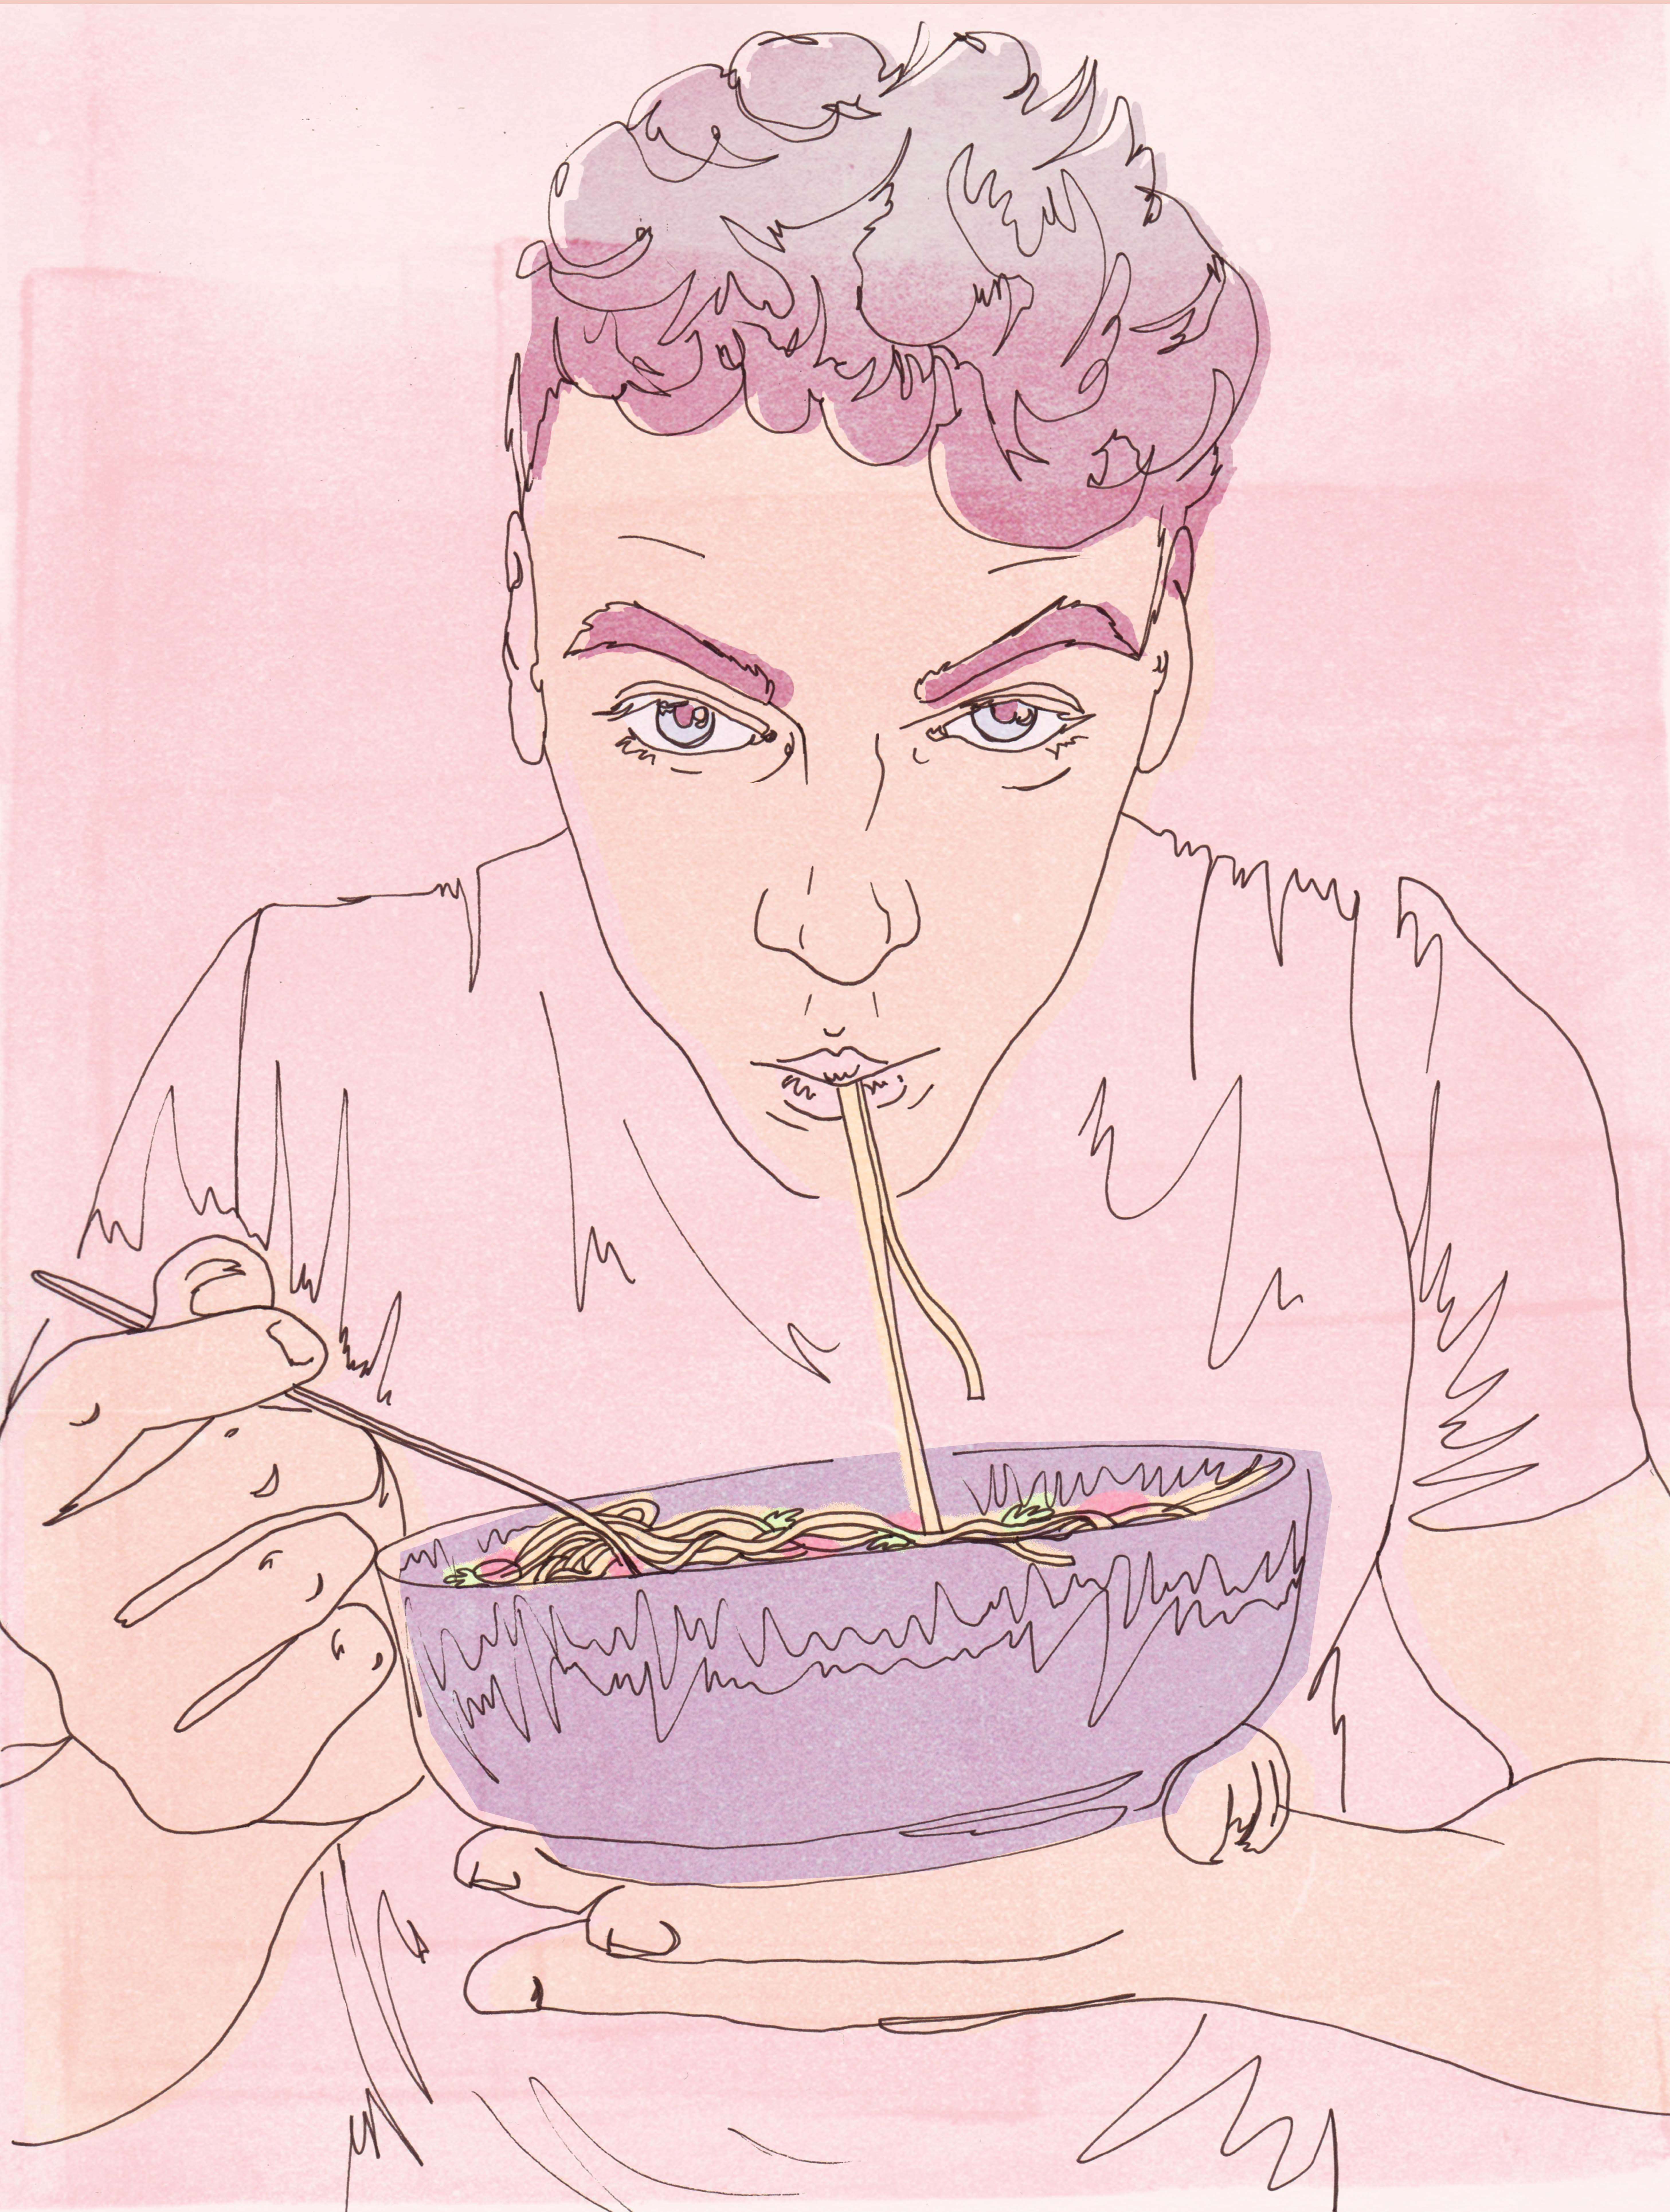 Illustration, a young man eating spaghetti from a bowl.